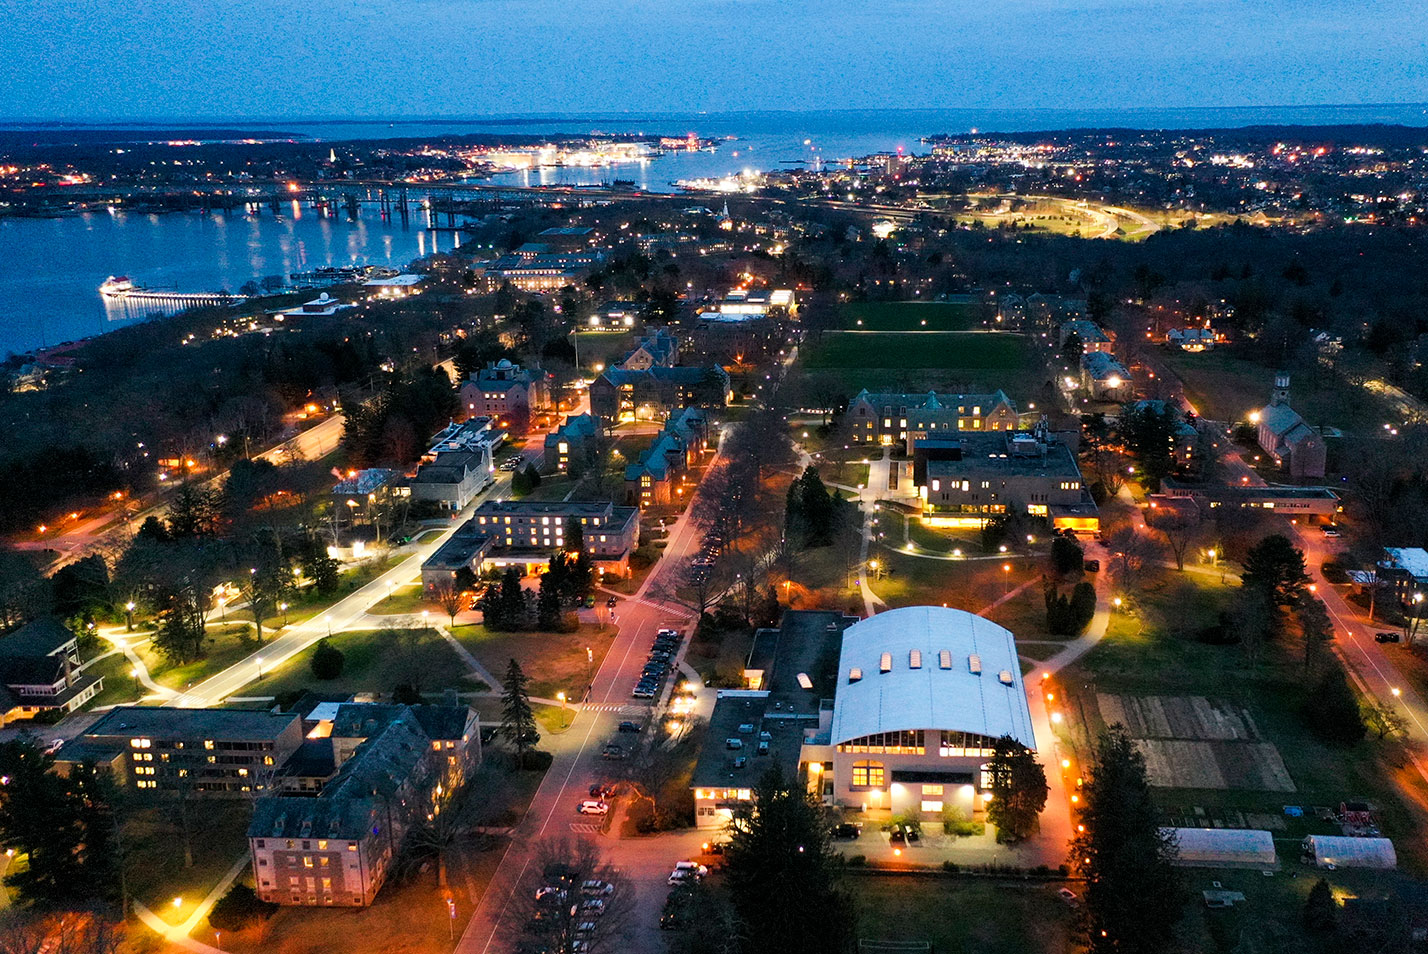 Over head shot of campus at night